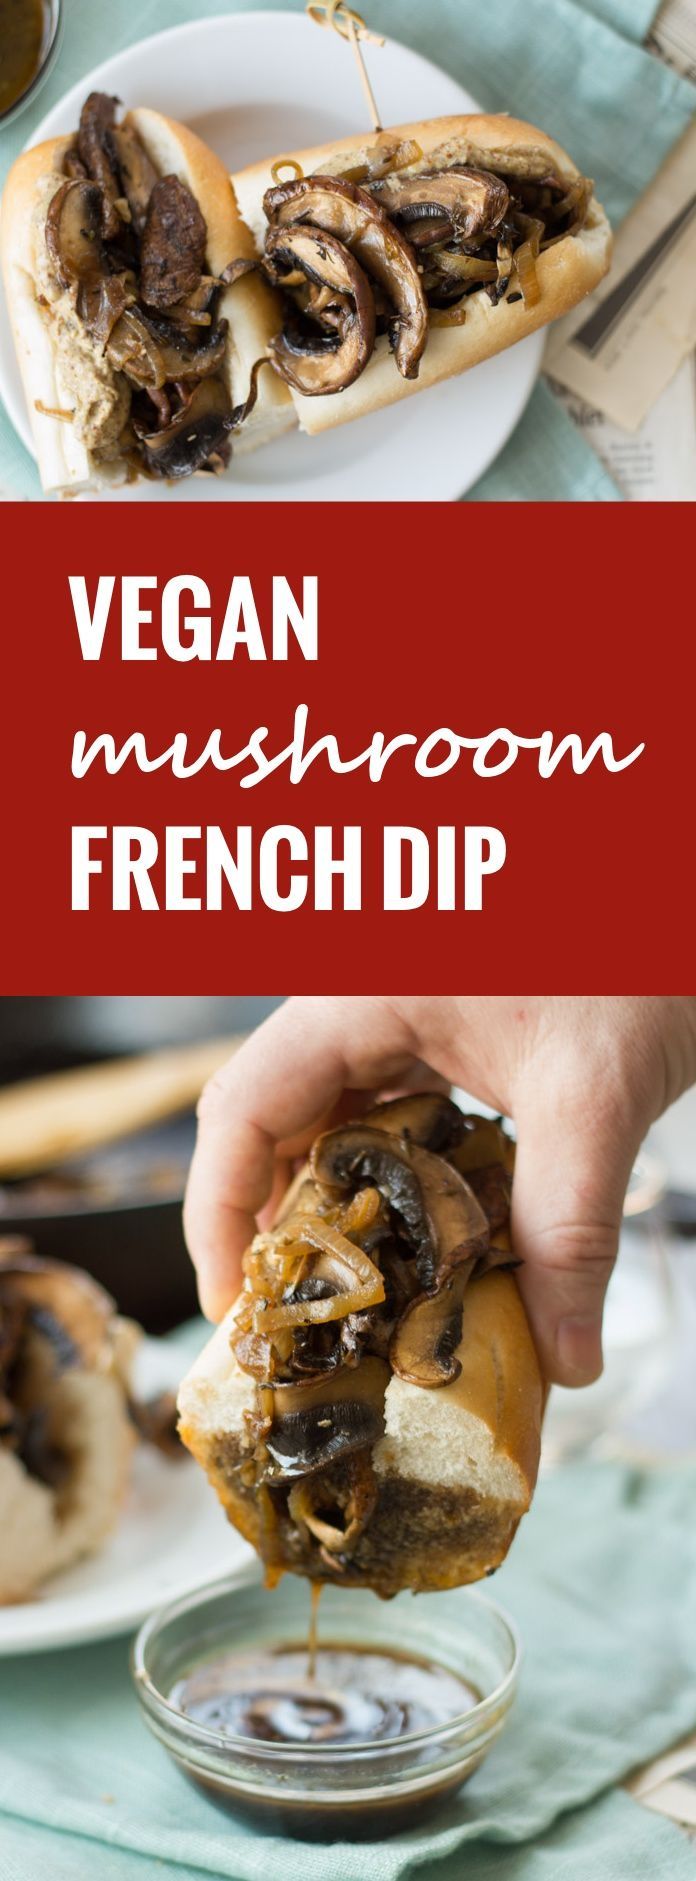 These vegan French dip sandwiches are made with sautéed portobellos, dressed in spicy horseradish mustard and served ready for